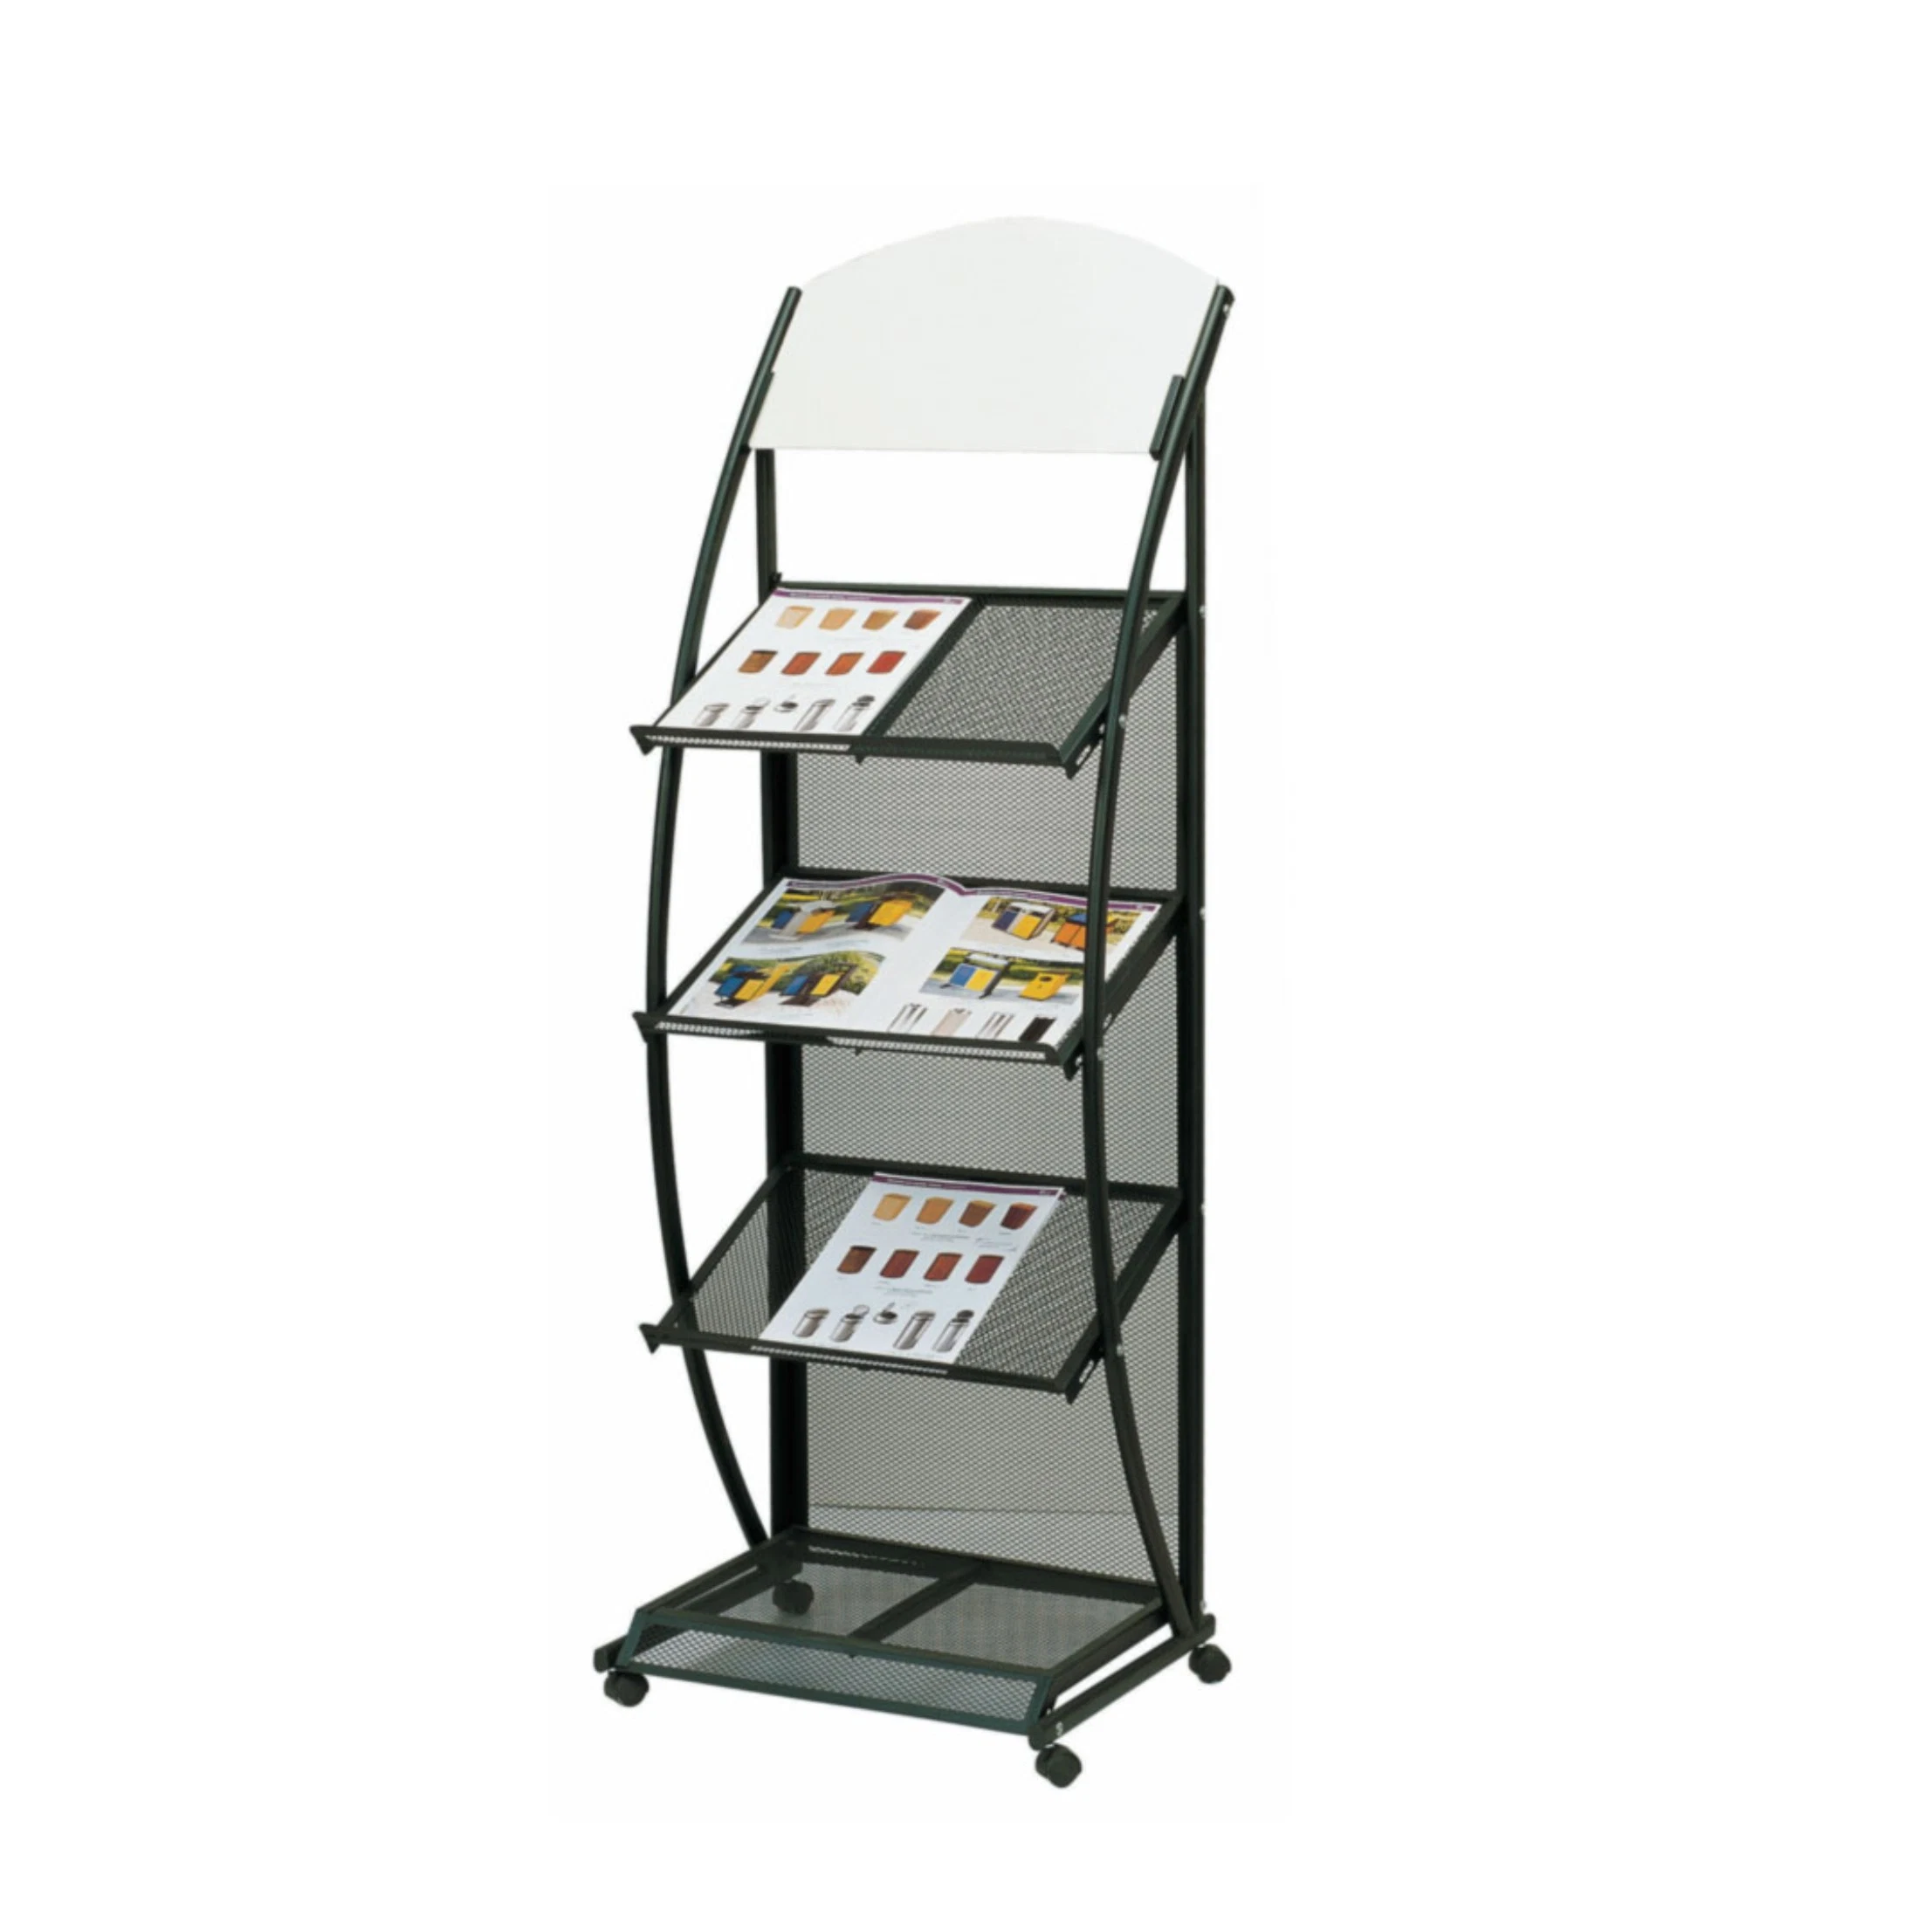 Newspaper Stand for Lobby with Stainless Steel (CJ-10)